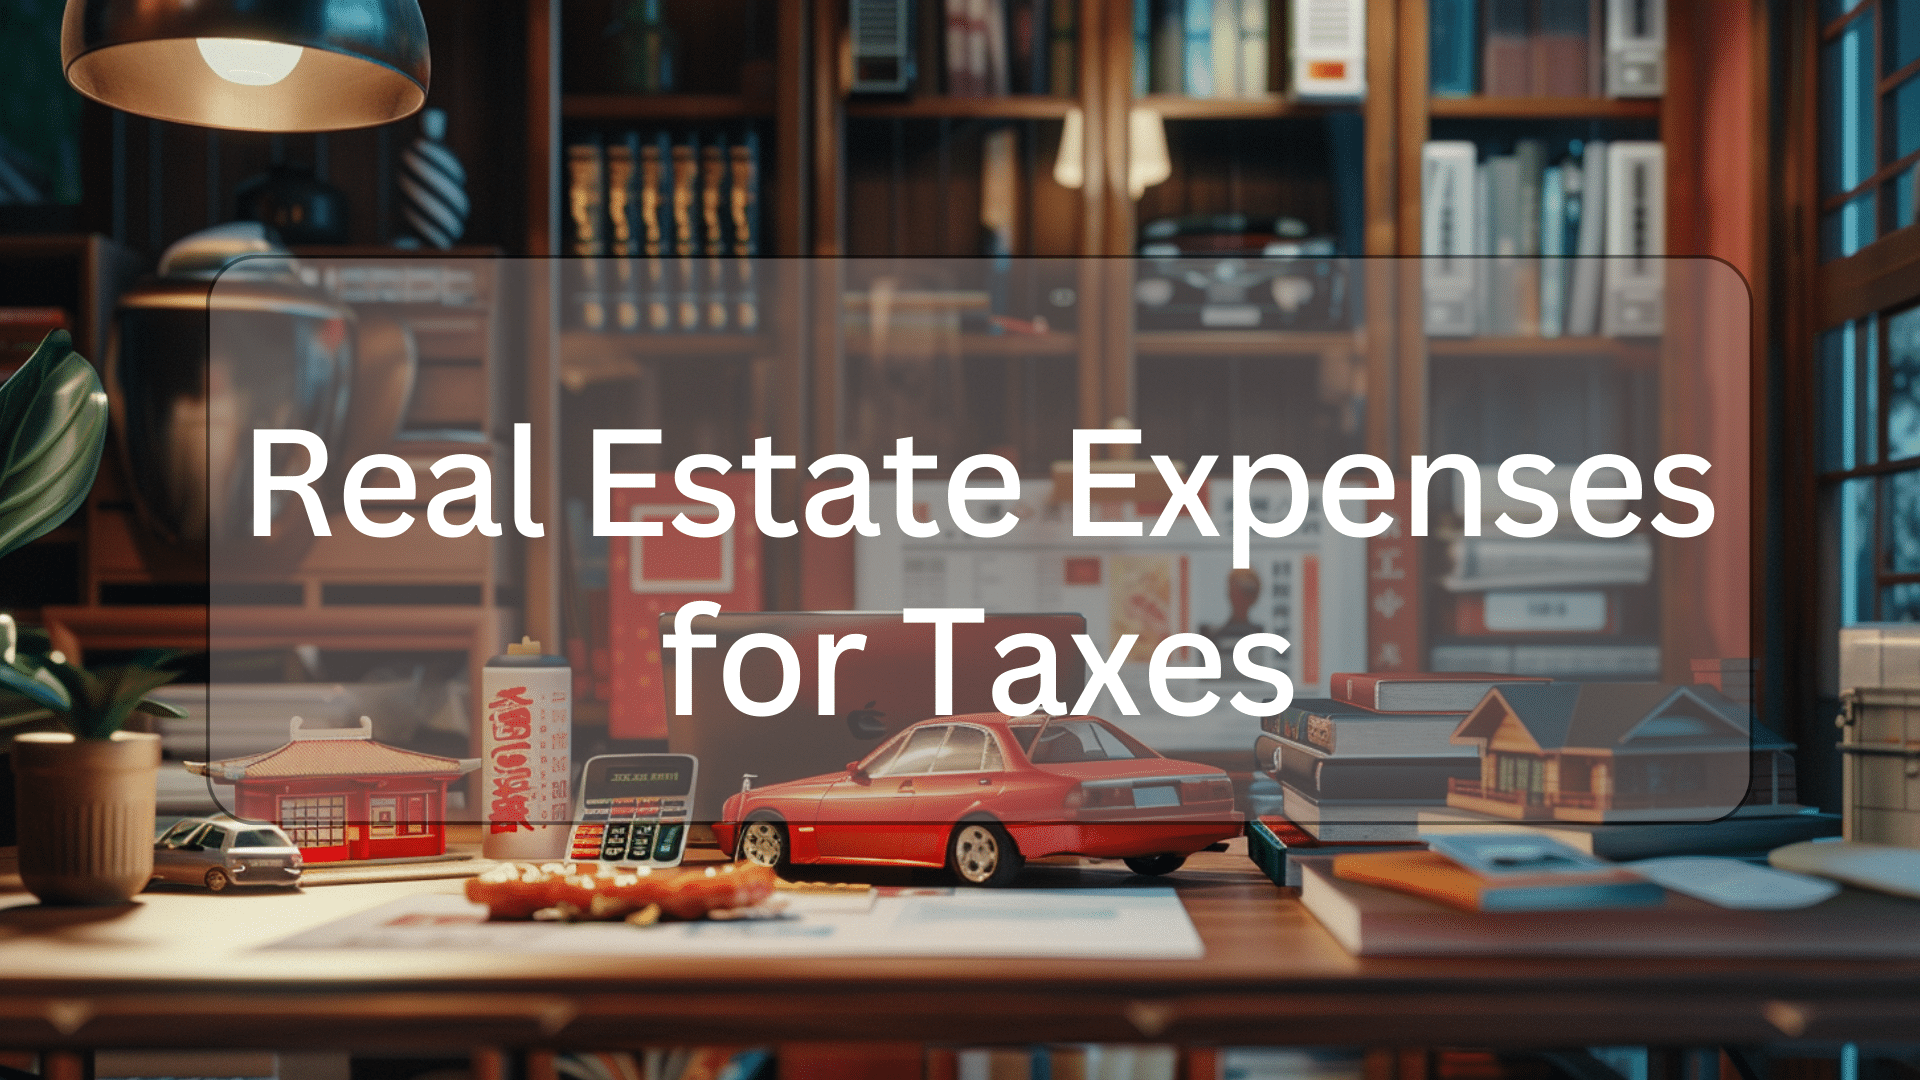 Real Estate Expenses for Taxes illustration